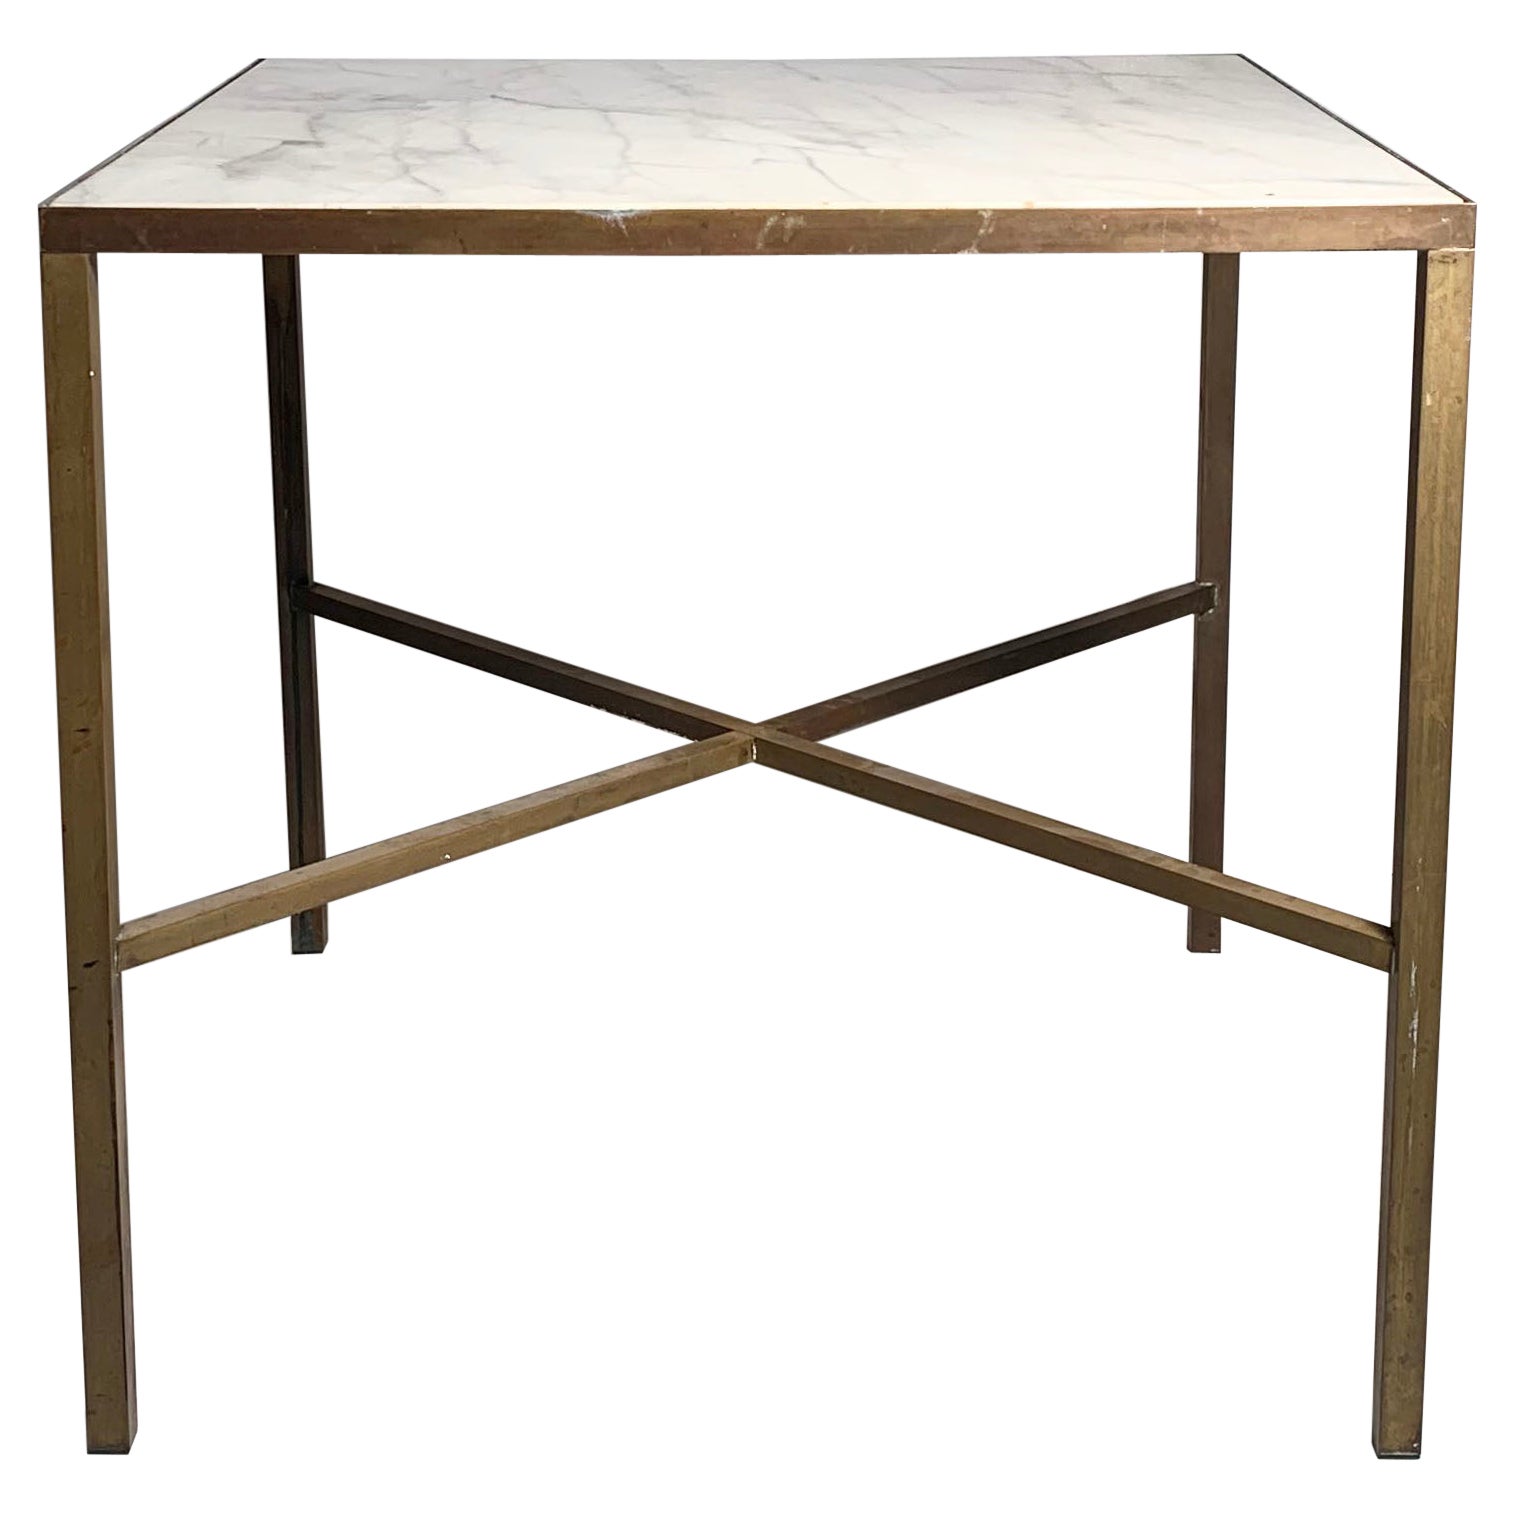 A Rare Paul McCobb Brass and Marble Dinette Table For Sale